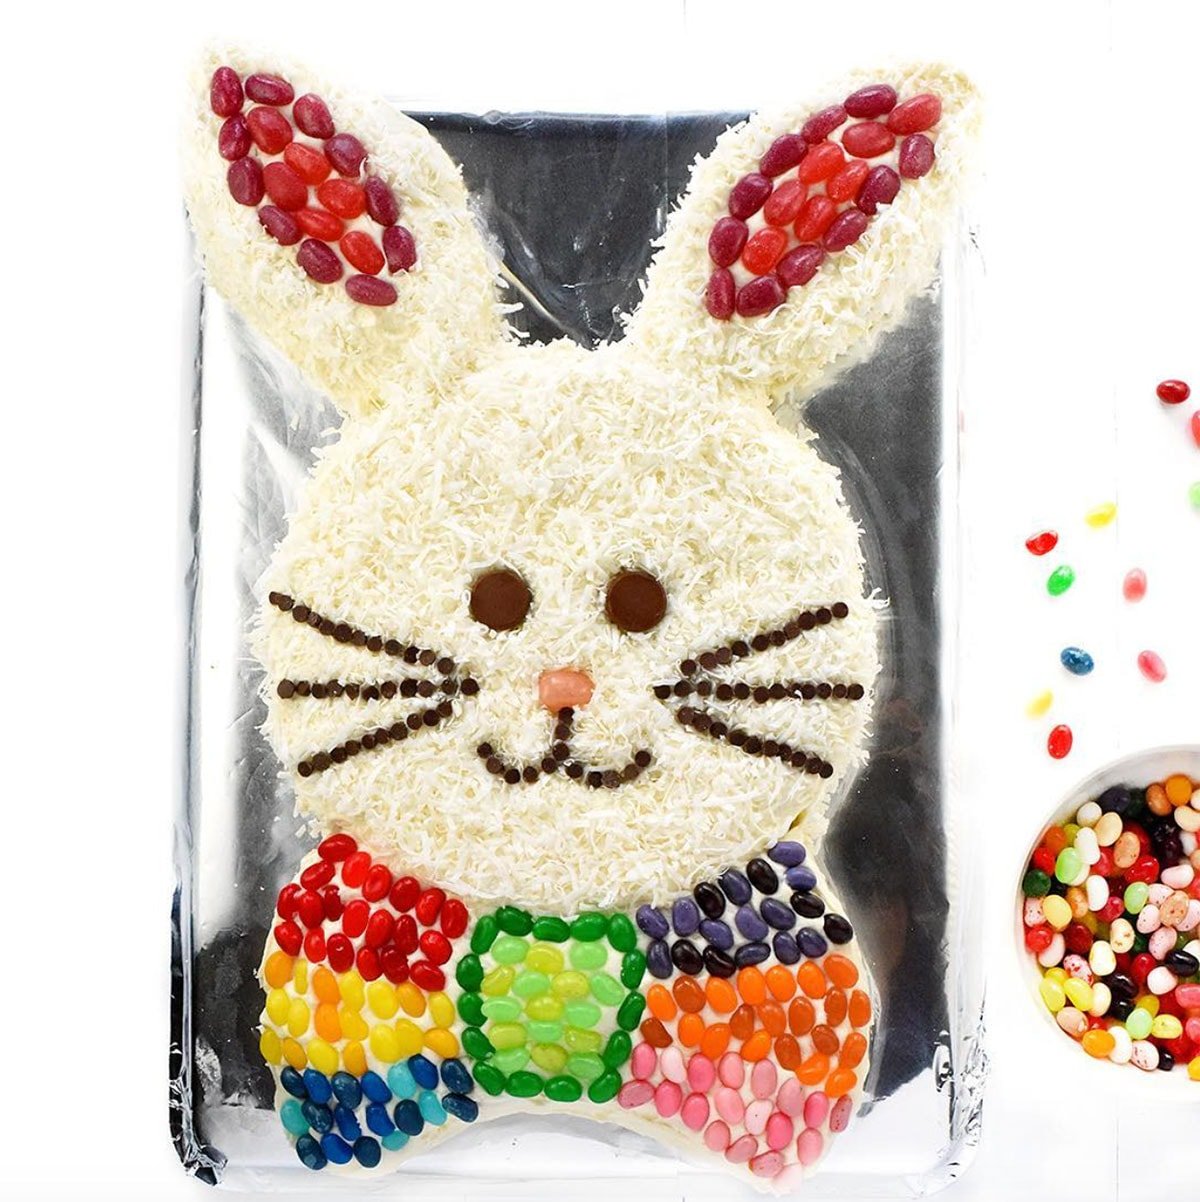 Easy homemade Easter Bunny Cake, made from scratch and decorated with jelly beans.